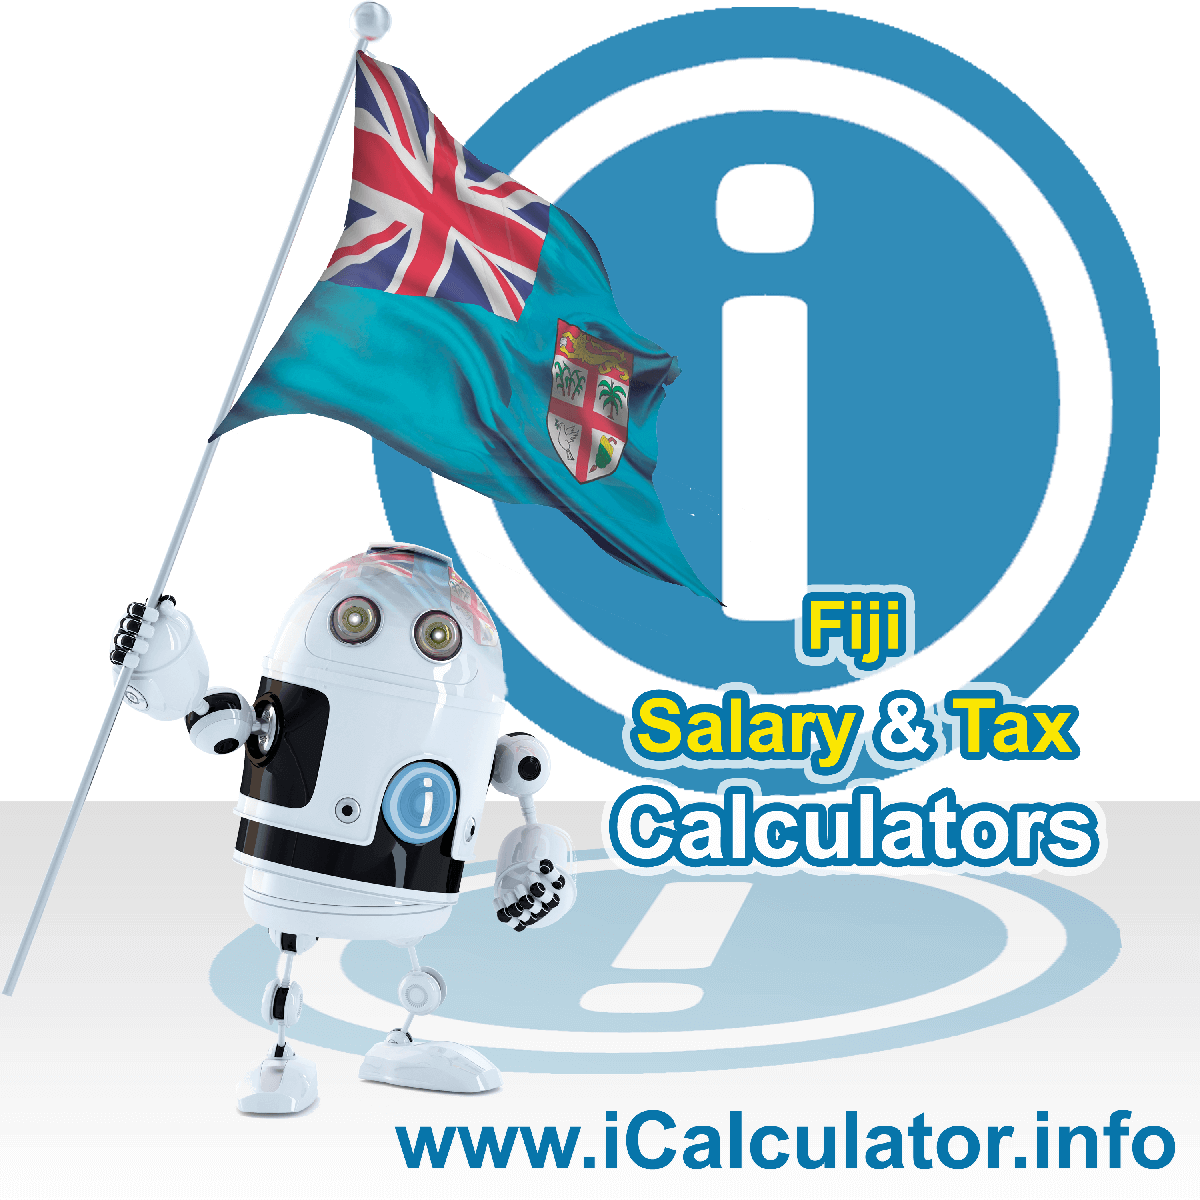 Fiji Salary Calculator. This image shows the Fijiese flag and information relating to the tax formula for the Fiji Tax Calculator